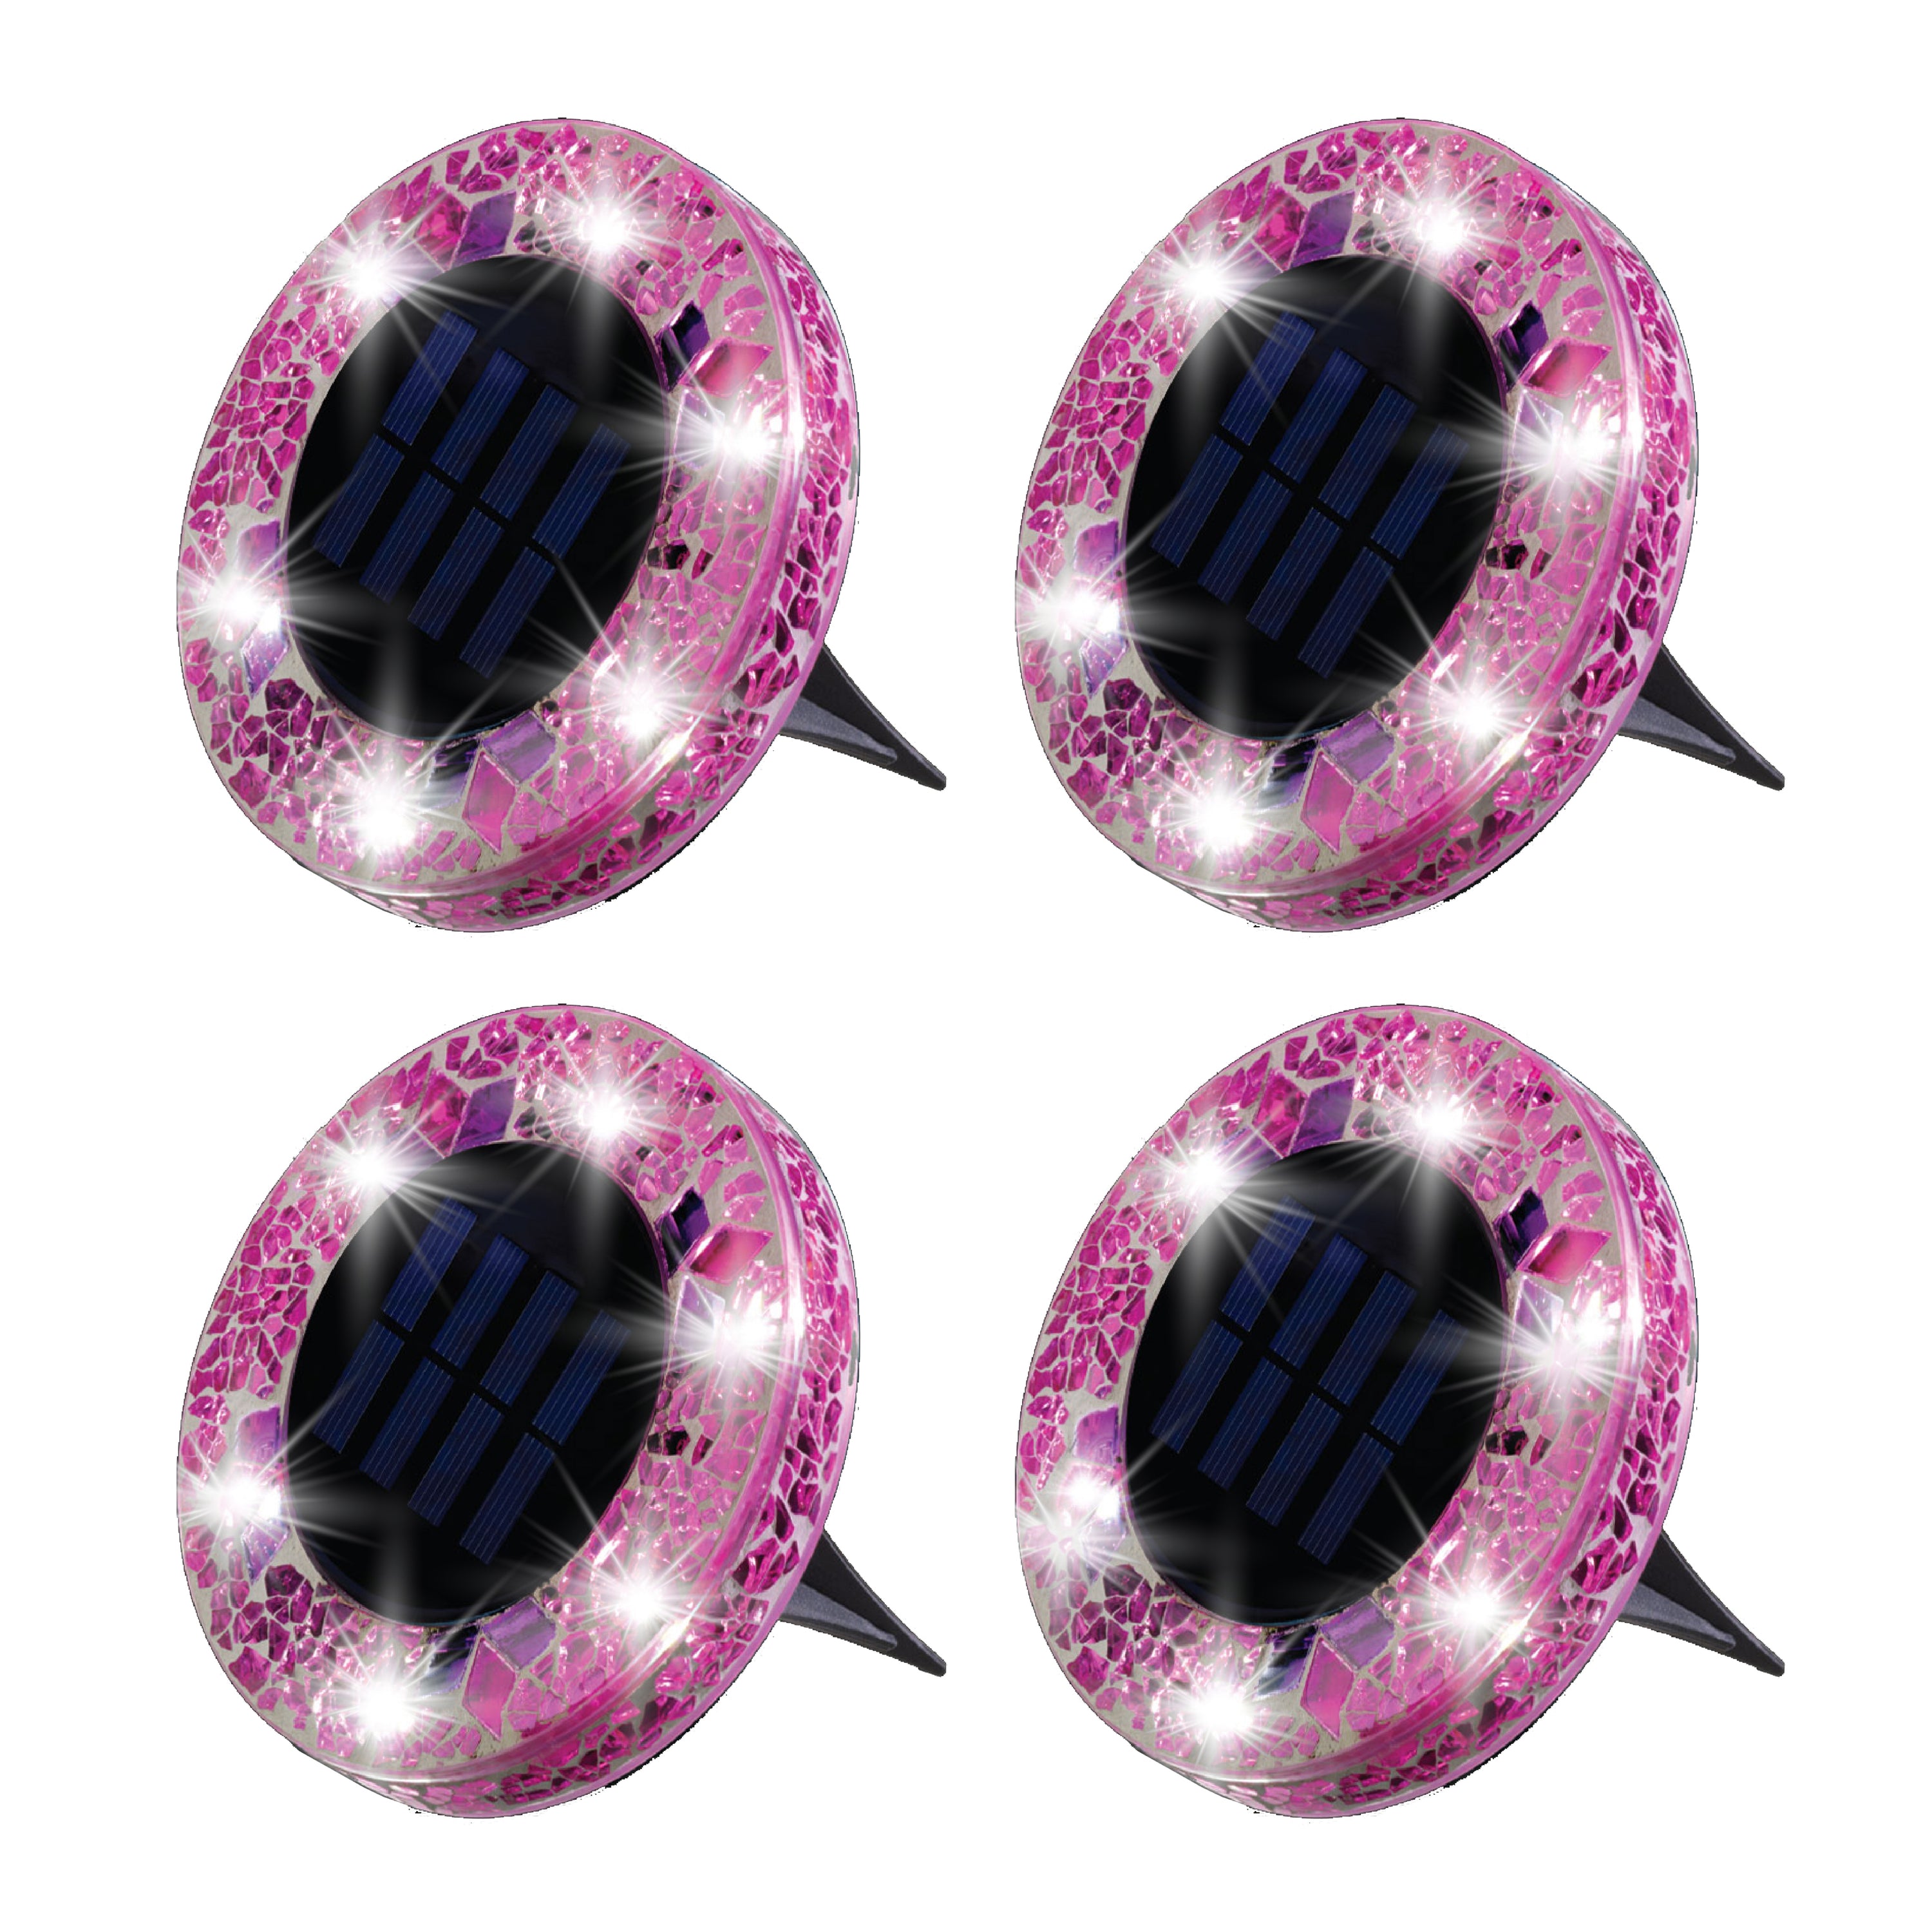 Bell + Howell Pathway & Landscape Disk Lights Mosaic - Pink - 4 Pack